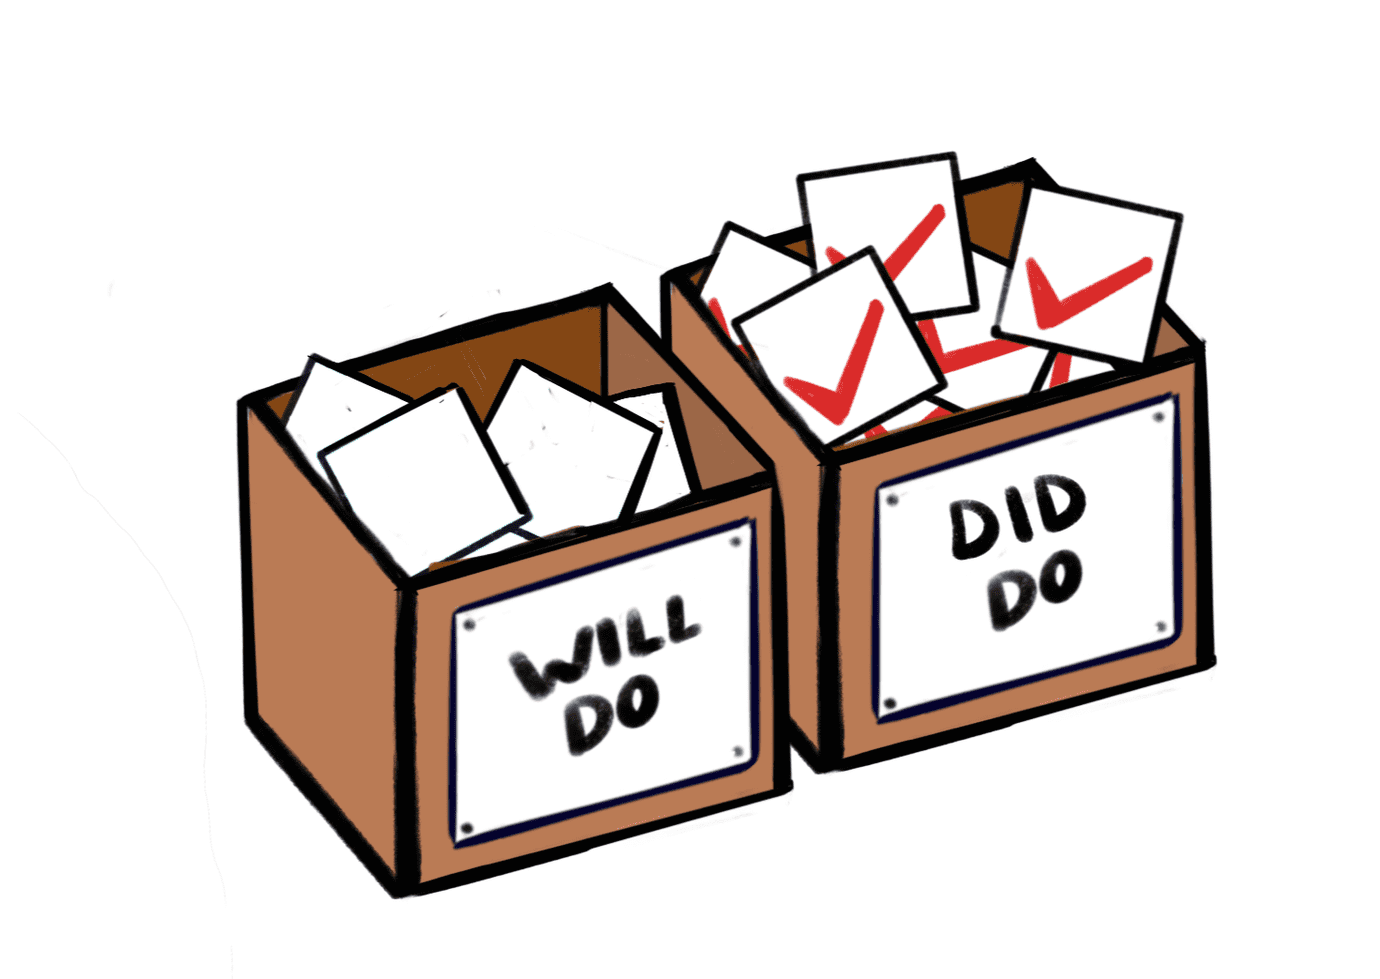 "will do" cardboard box has fewer items, "did do" box is full of check marks